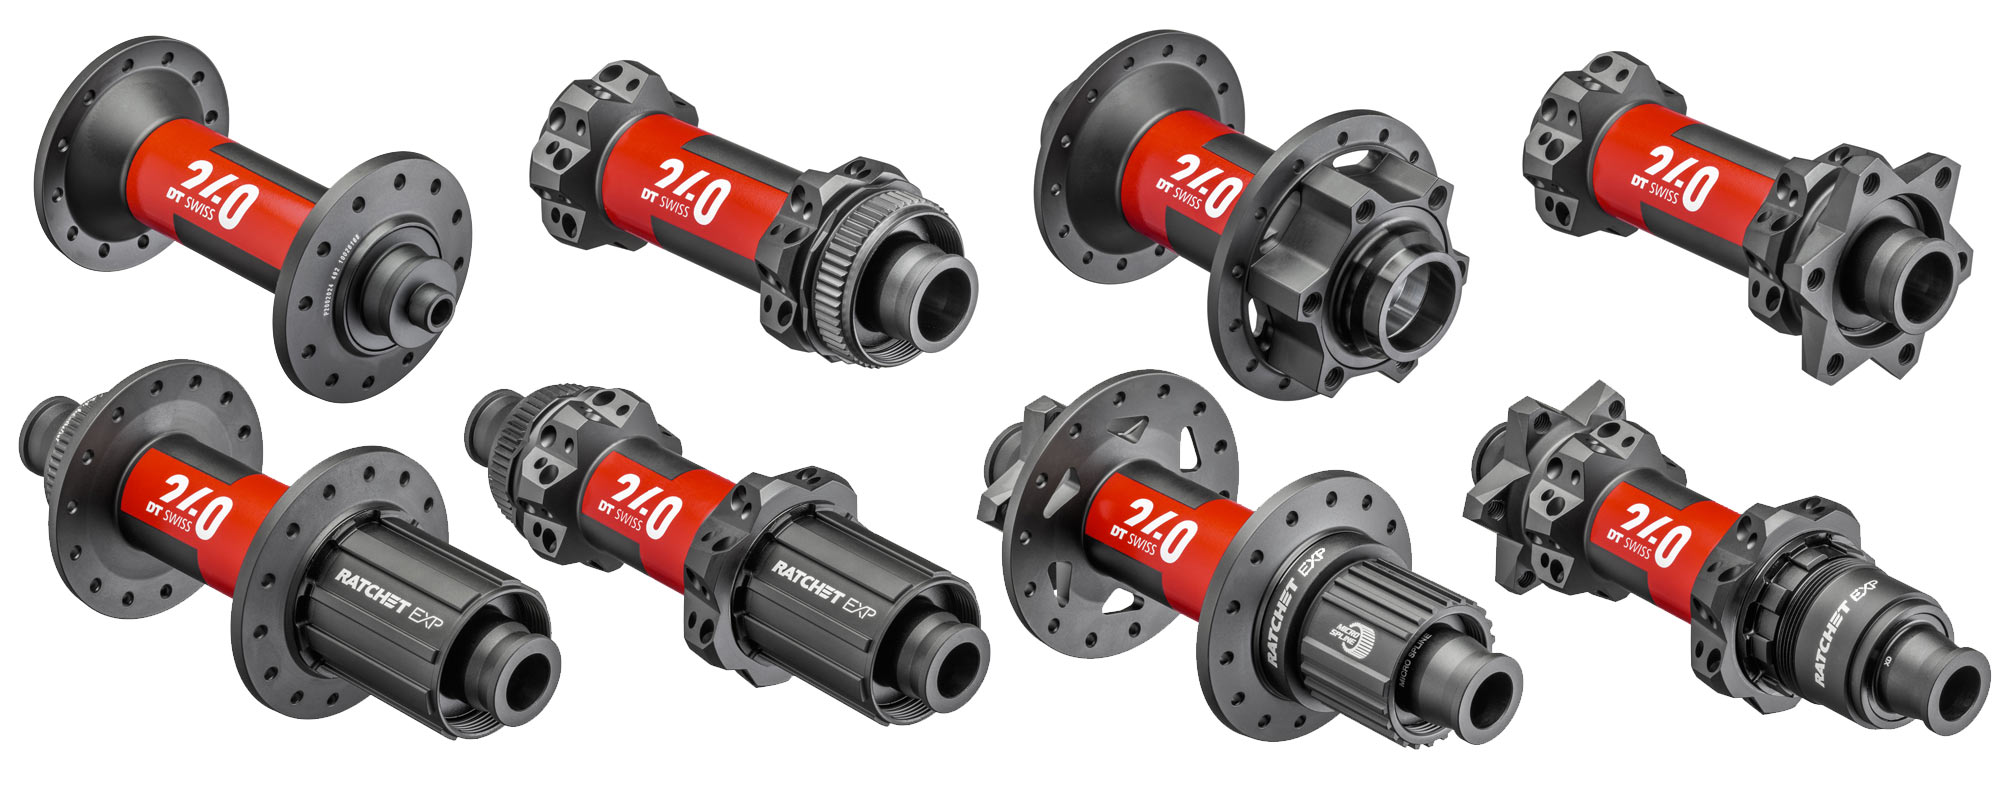 New 2020 DT Swiss 240 hubs, updated lighter stiffer more durable benchmark DT 240 road mountain bike hubset, with Ratchet EXP star ratchet engagement